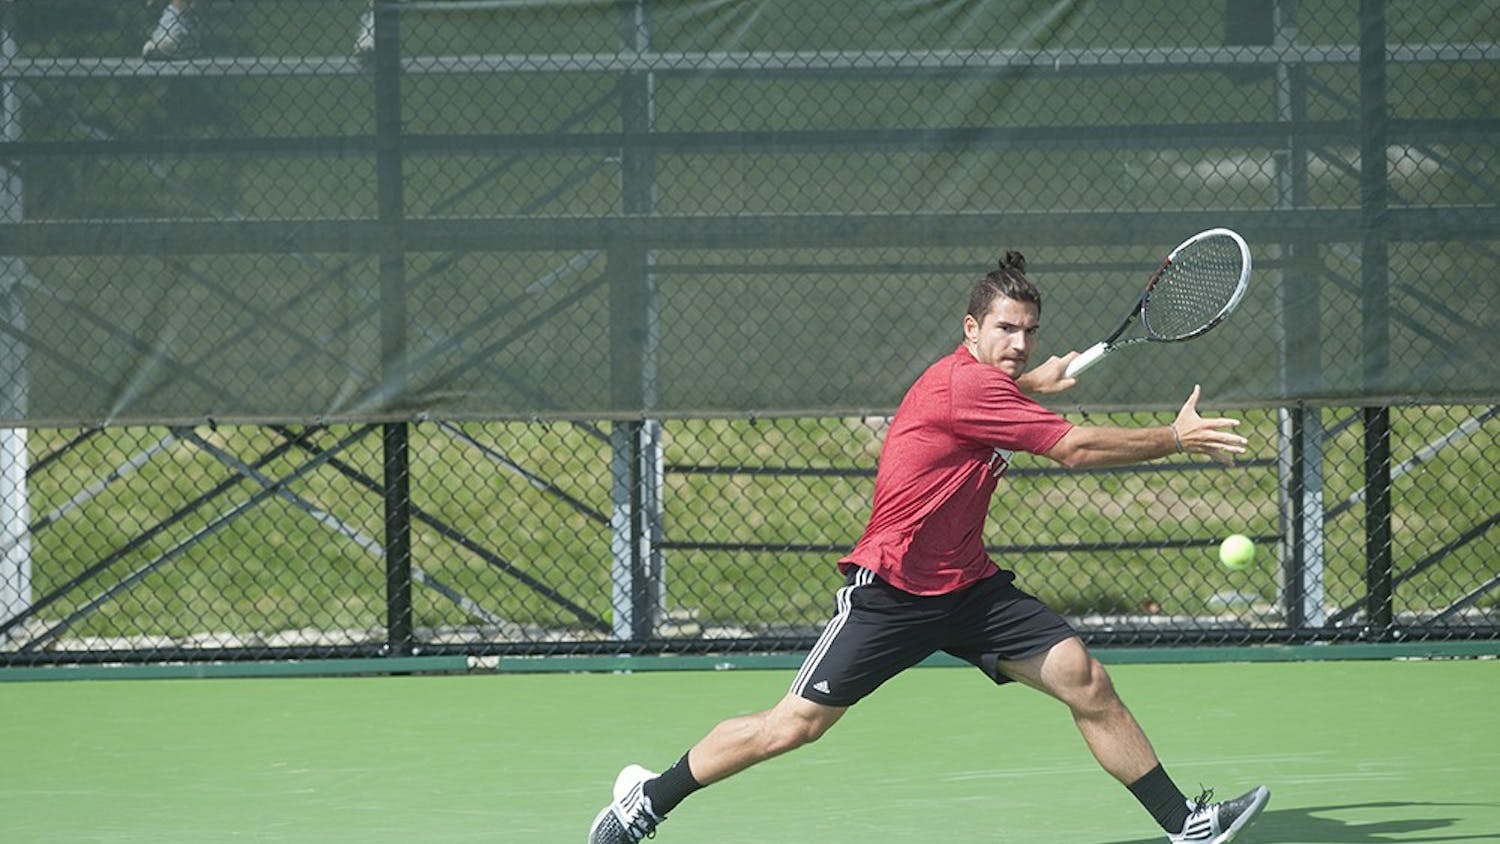 IU Junior Sam Monette hitting a forehand shot against Matt Hagan of the University of Iowa on Apr. 5 at the Varsity Tennis Courts. Monette edged his opponent and won the match 7-6, 7-6.